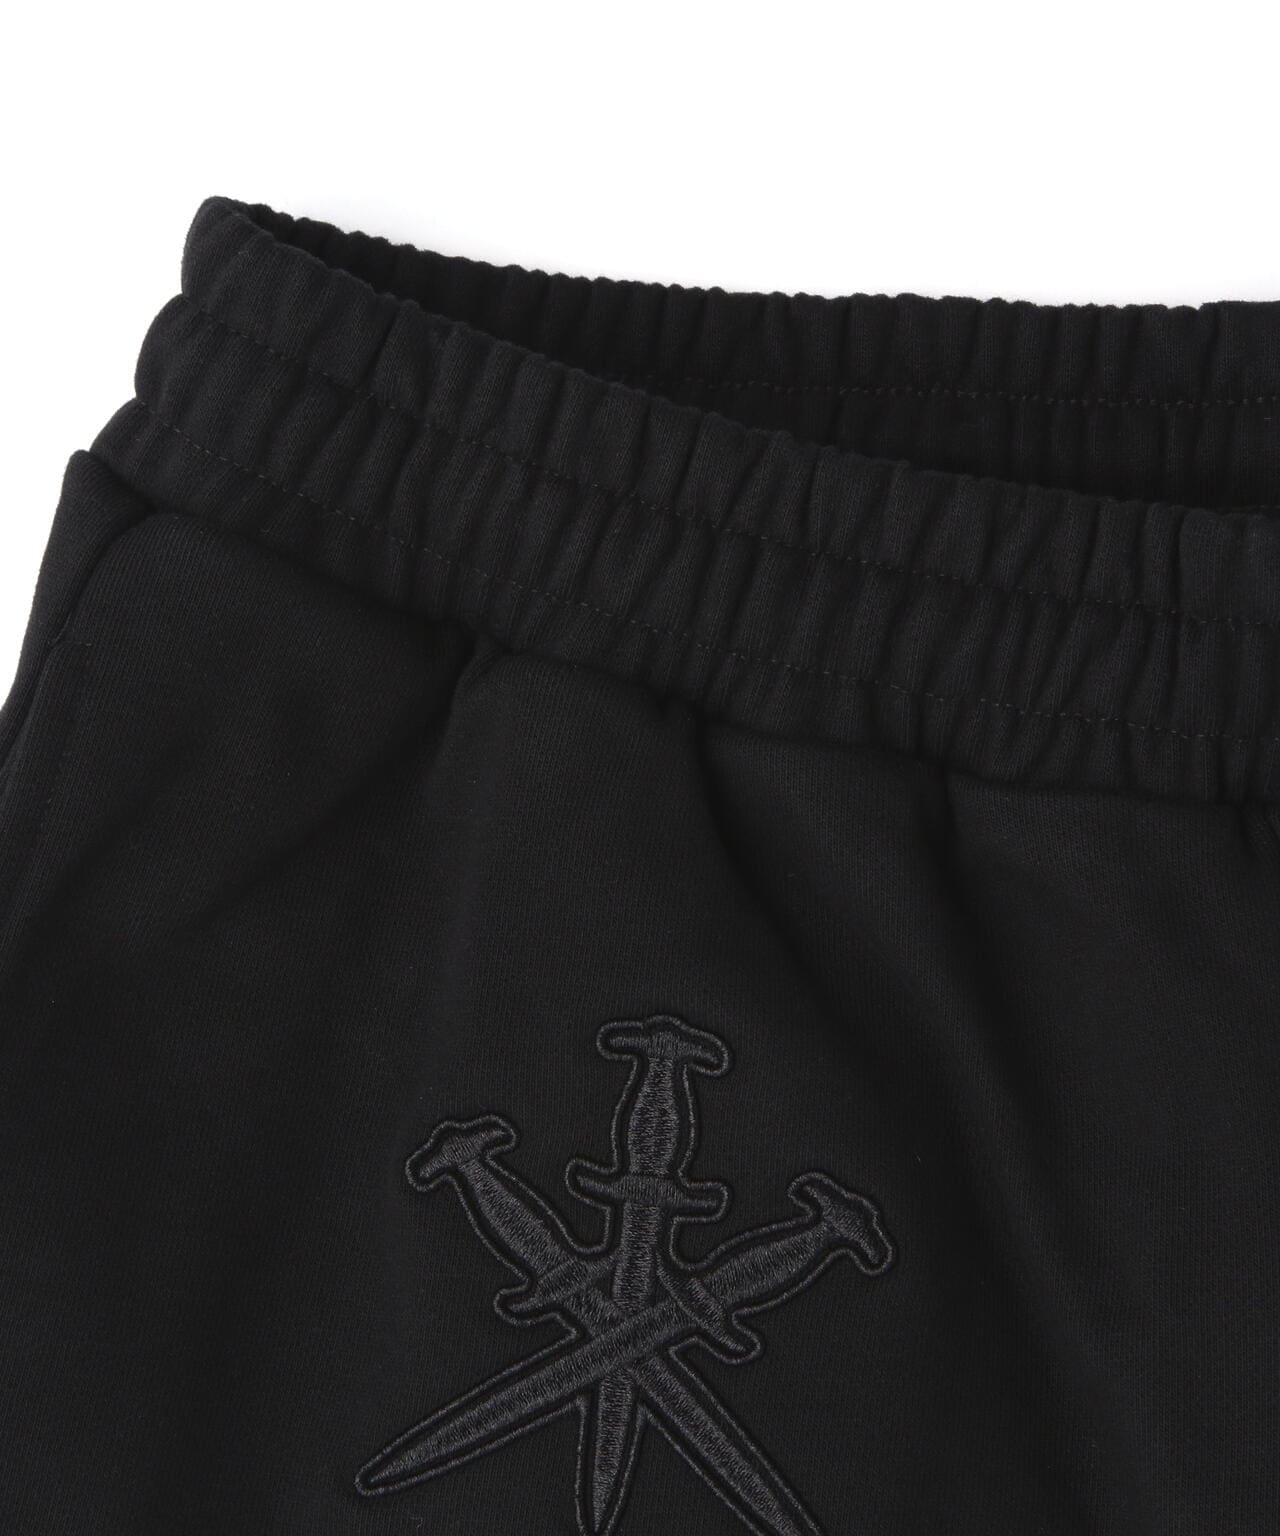 UNKNOWN LONDON/アンノウンロンドン/BLACK ON BLACK DAGGER EMBROIDERY SHORTS